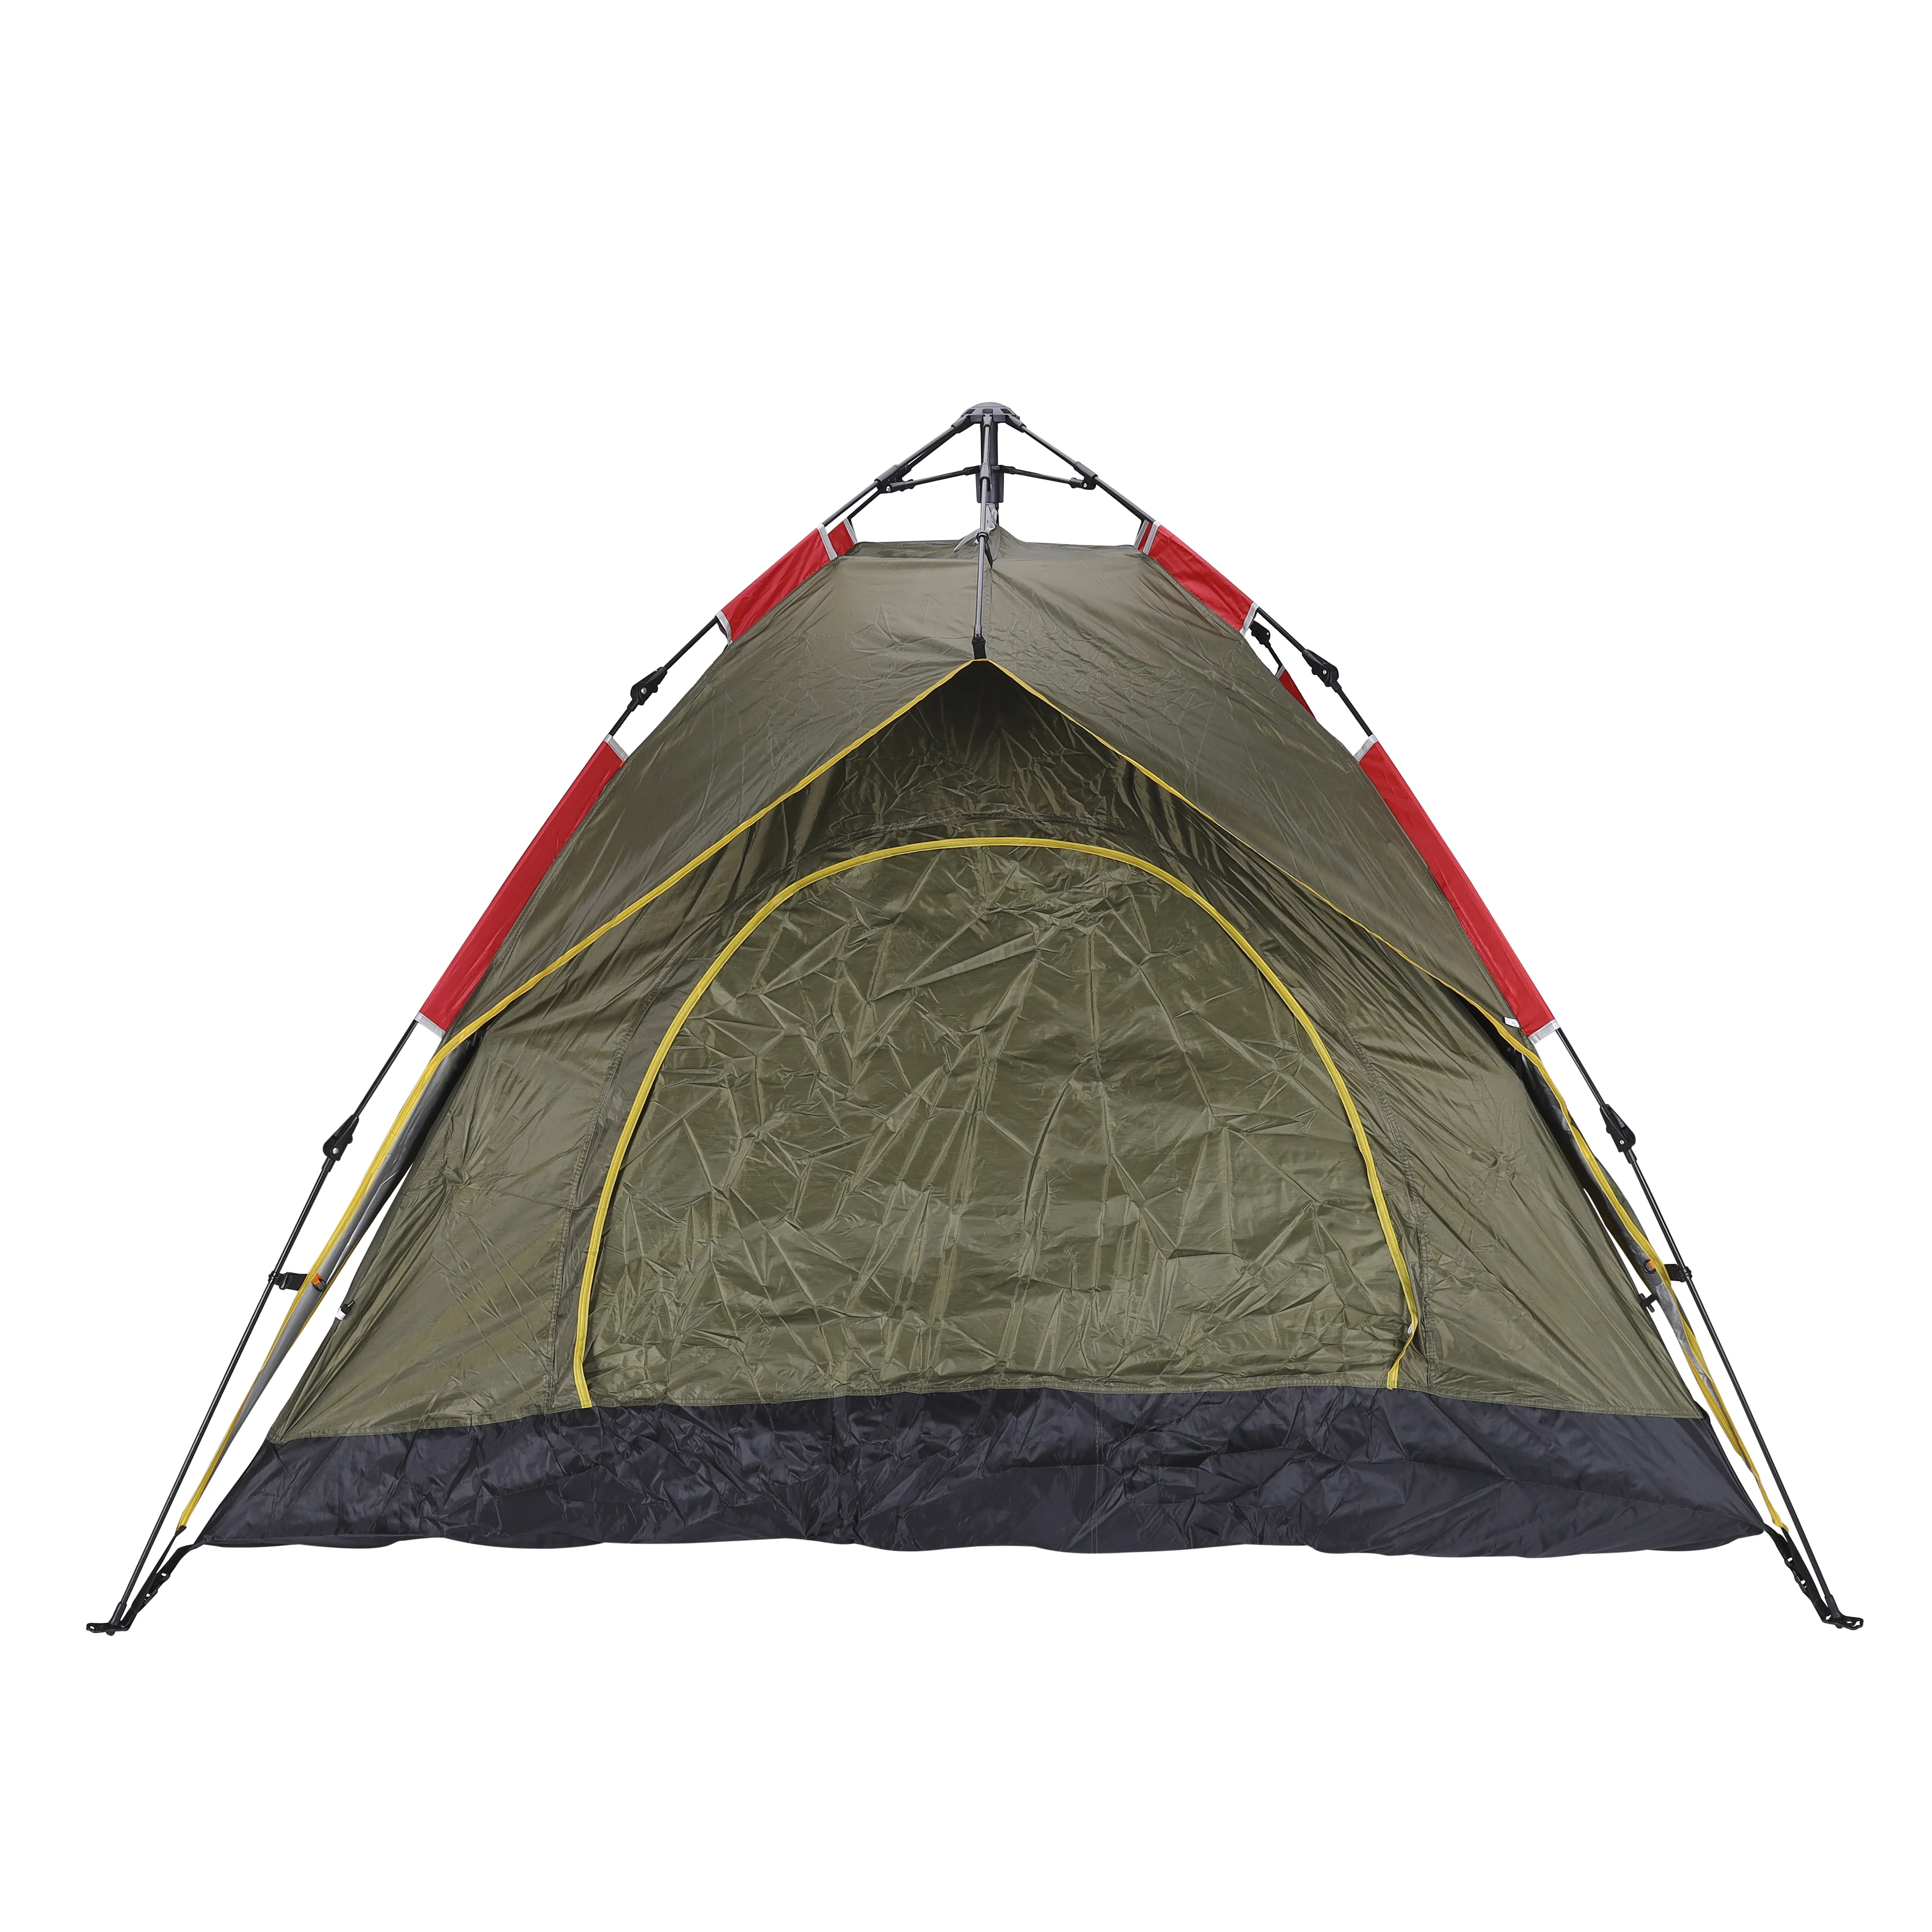 Royalford Season Tent 8 Person, Ultra-Light Backpacking Tent, RF10298 Easy Set Up Lightweight Waterproof Windproof Ideal for Camping Hiking Festival Outdoor